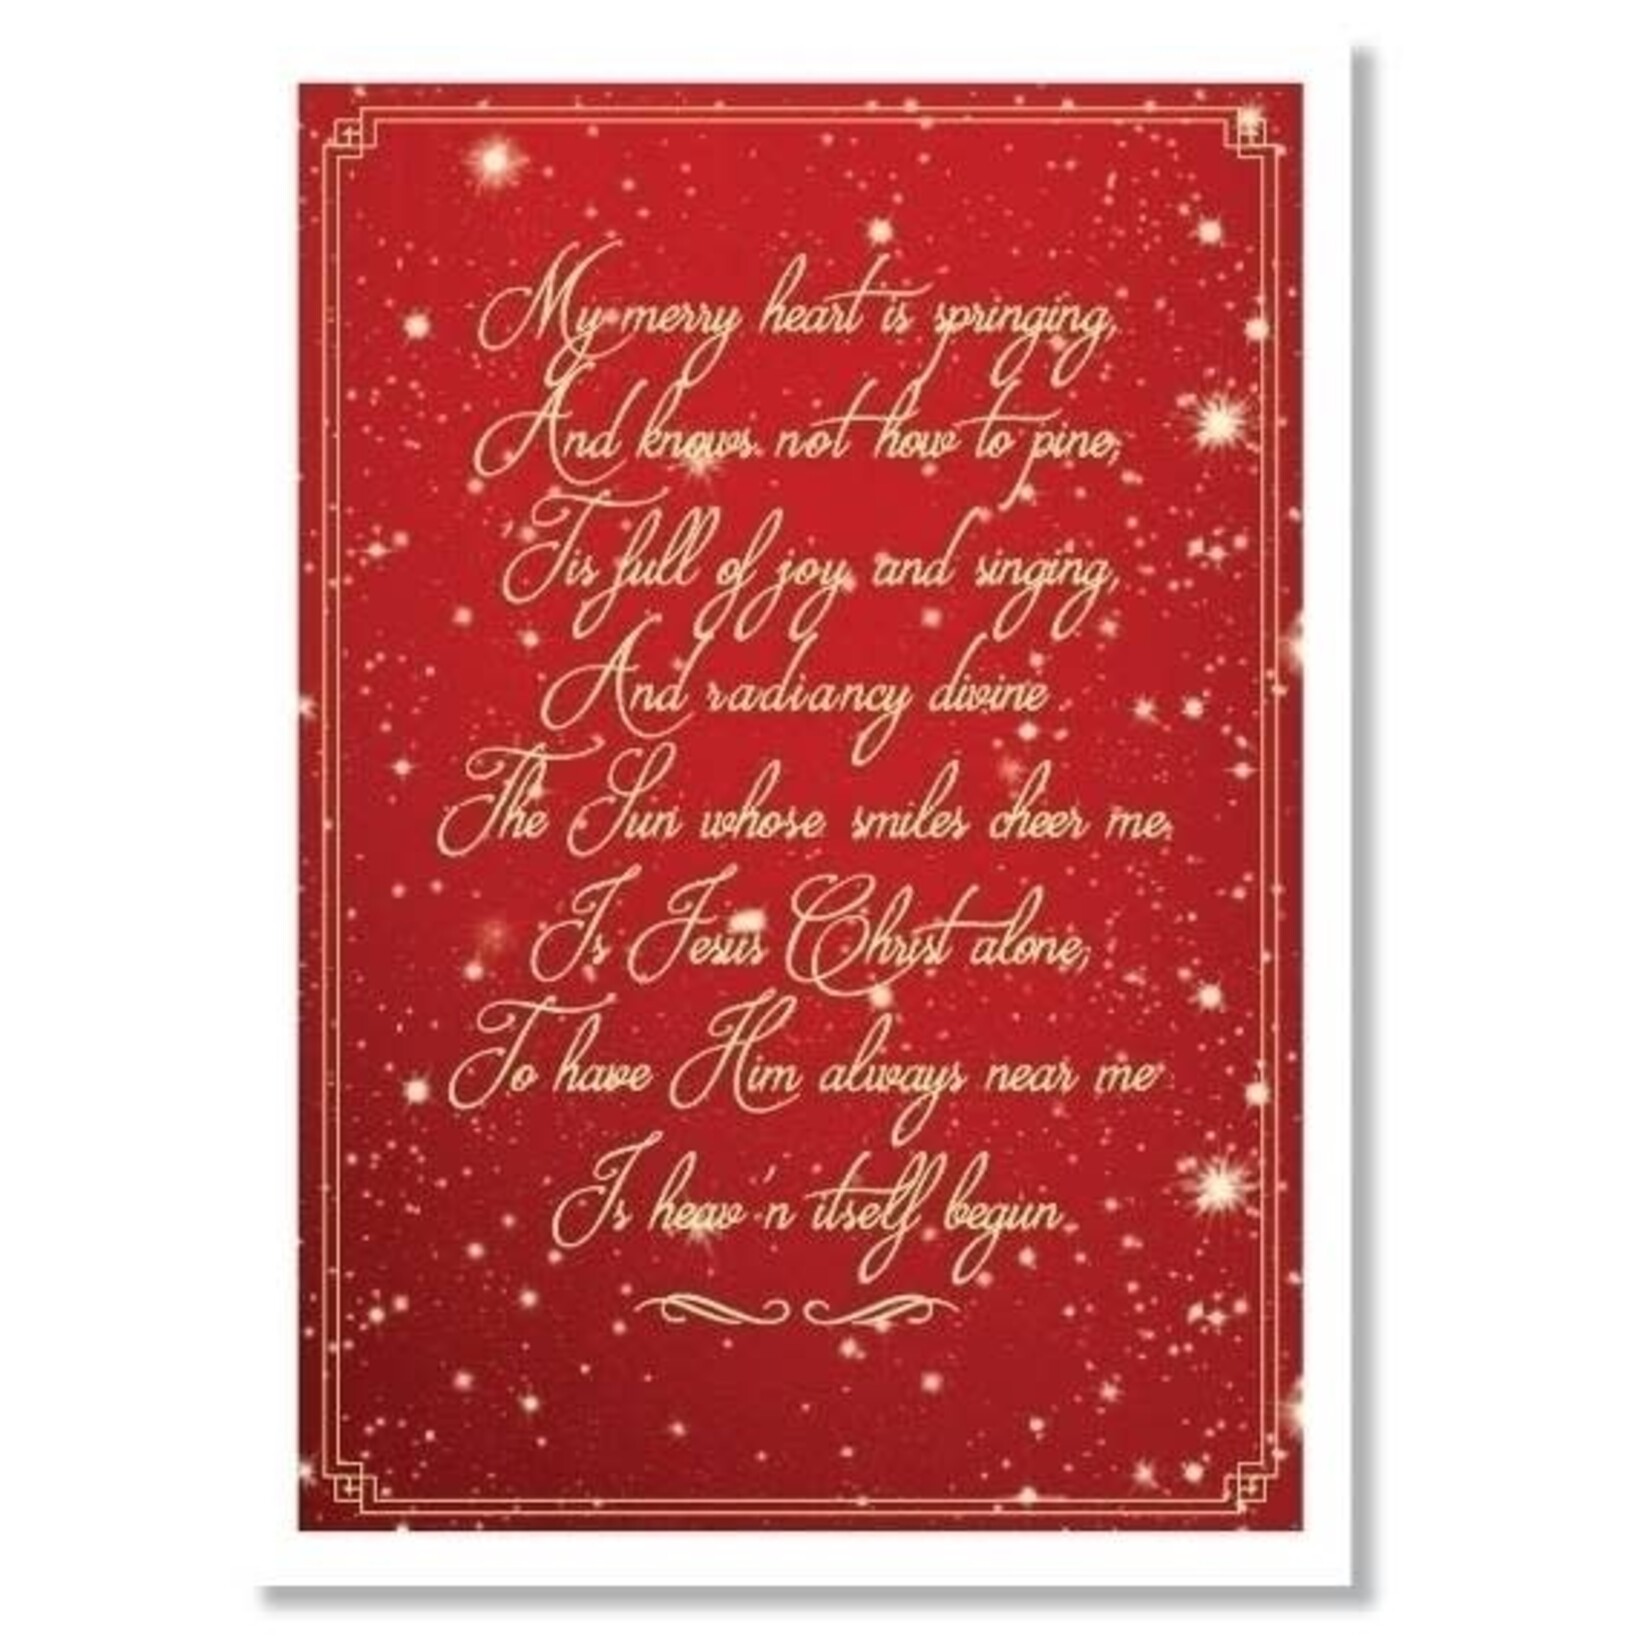 Hymns In My Heart - 5x7" Greeting Card - Christmas - My Merry Heart